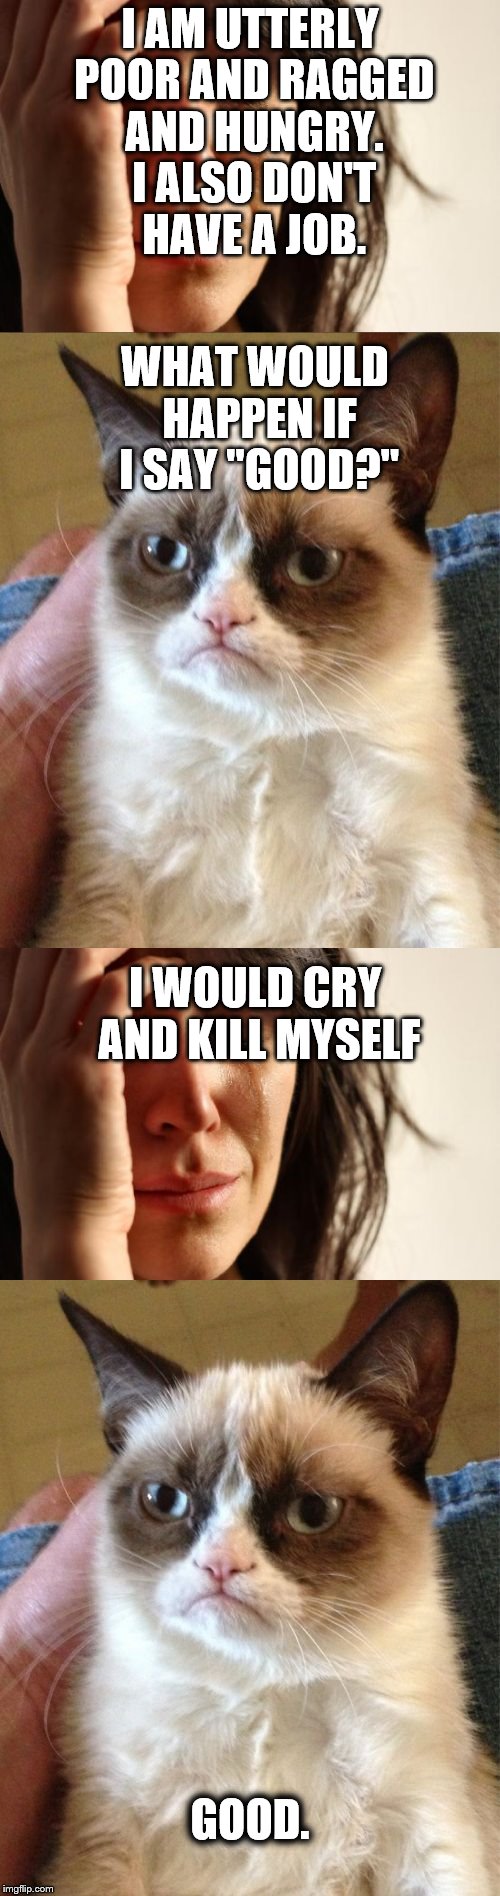 I AM UTTERLY POOR AND RAGGED AND HUNGRY. I ALSO DON'T HAVE A JOB. WHAT WOULD HAPPEN IF I SAY "GOOD?"; I WOULD CRY AND KILL MYSELF; GOOD. | image tagged in grumpy cat | made w/ Imgflip meme maker